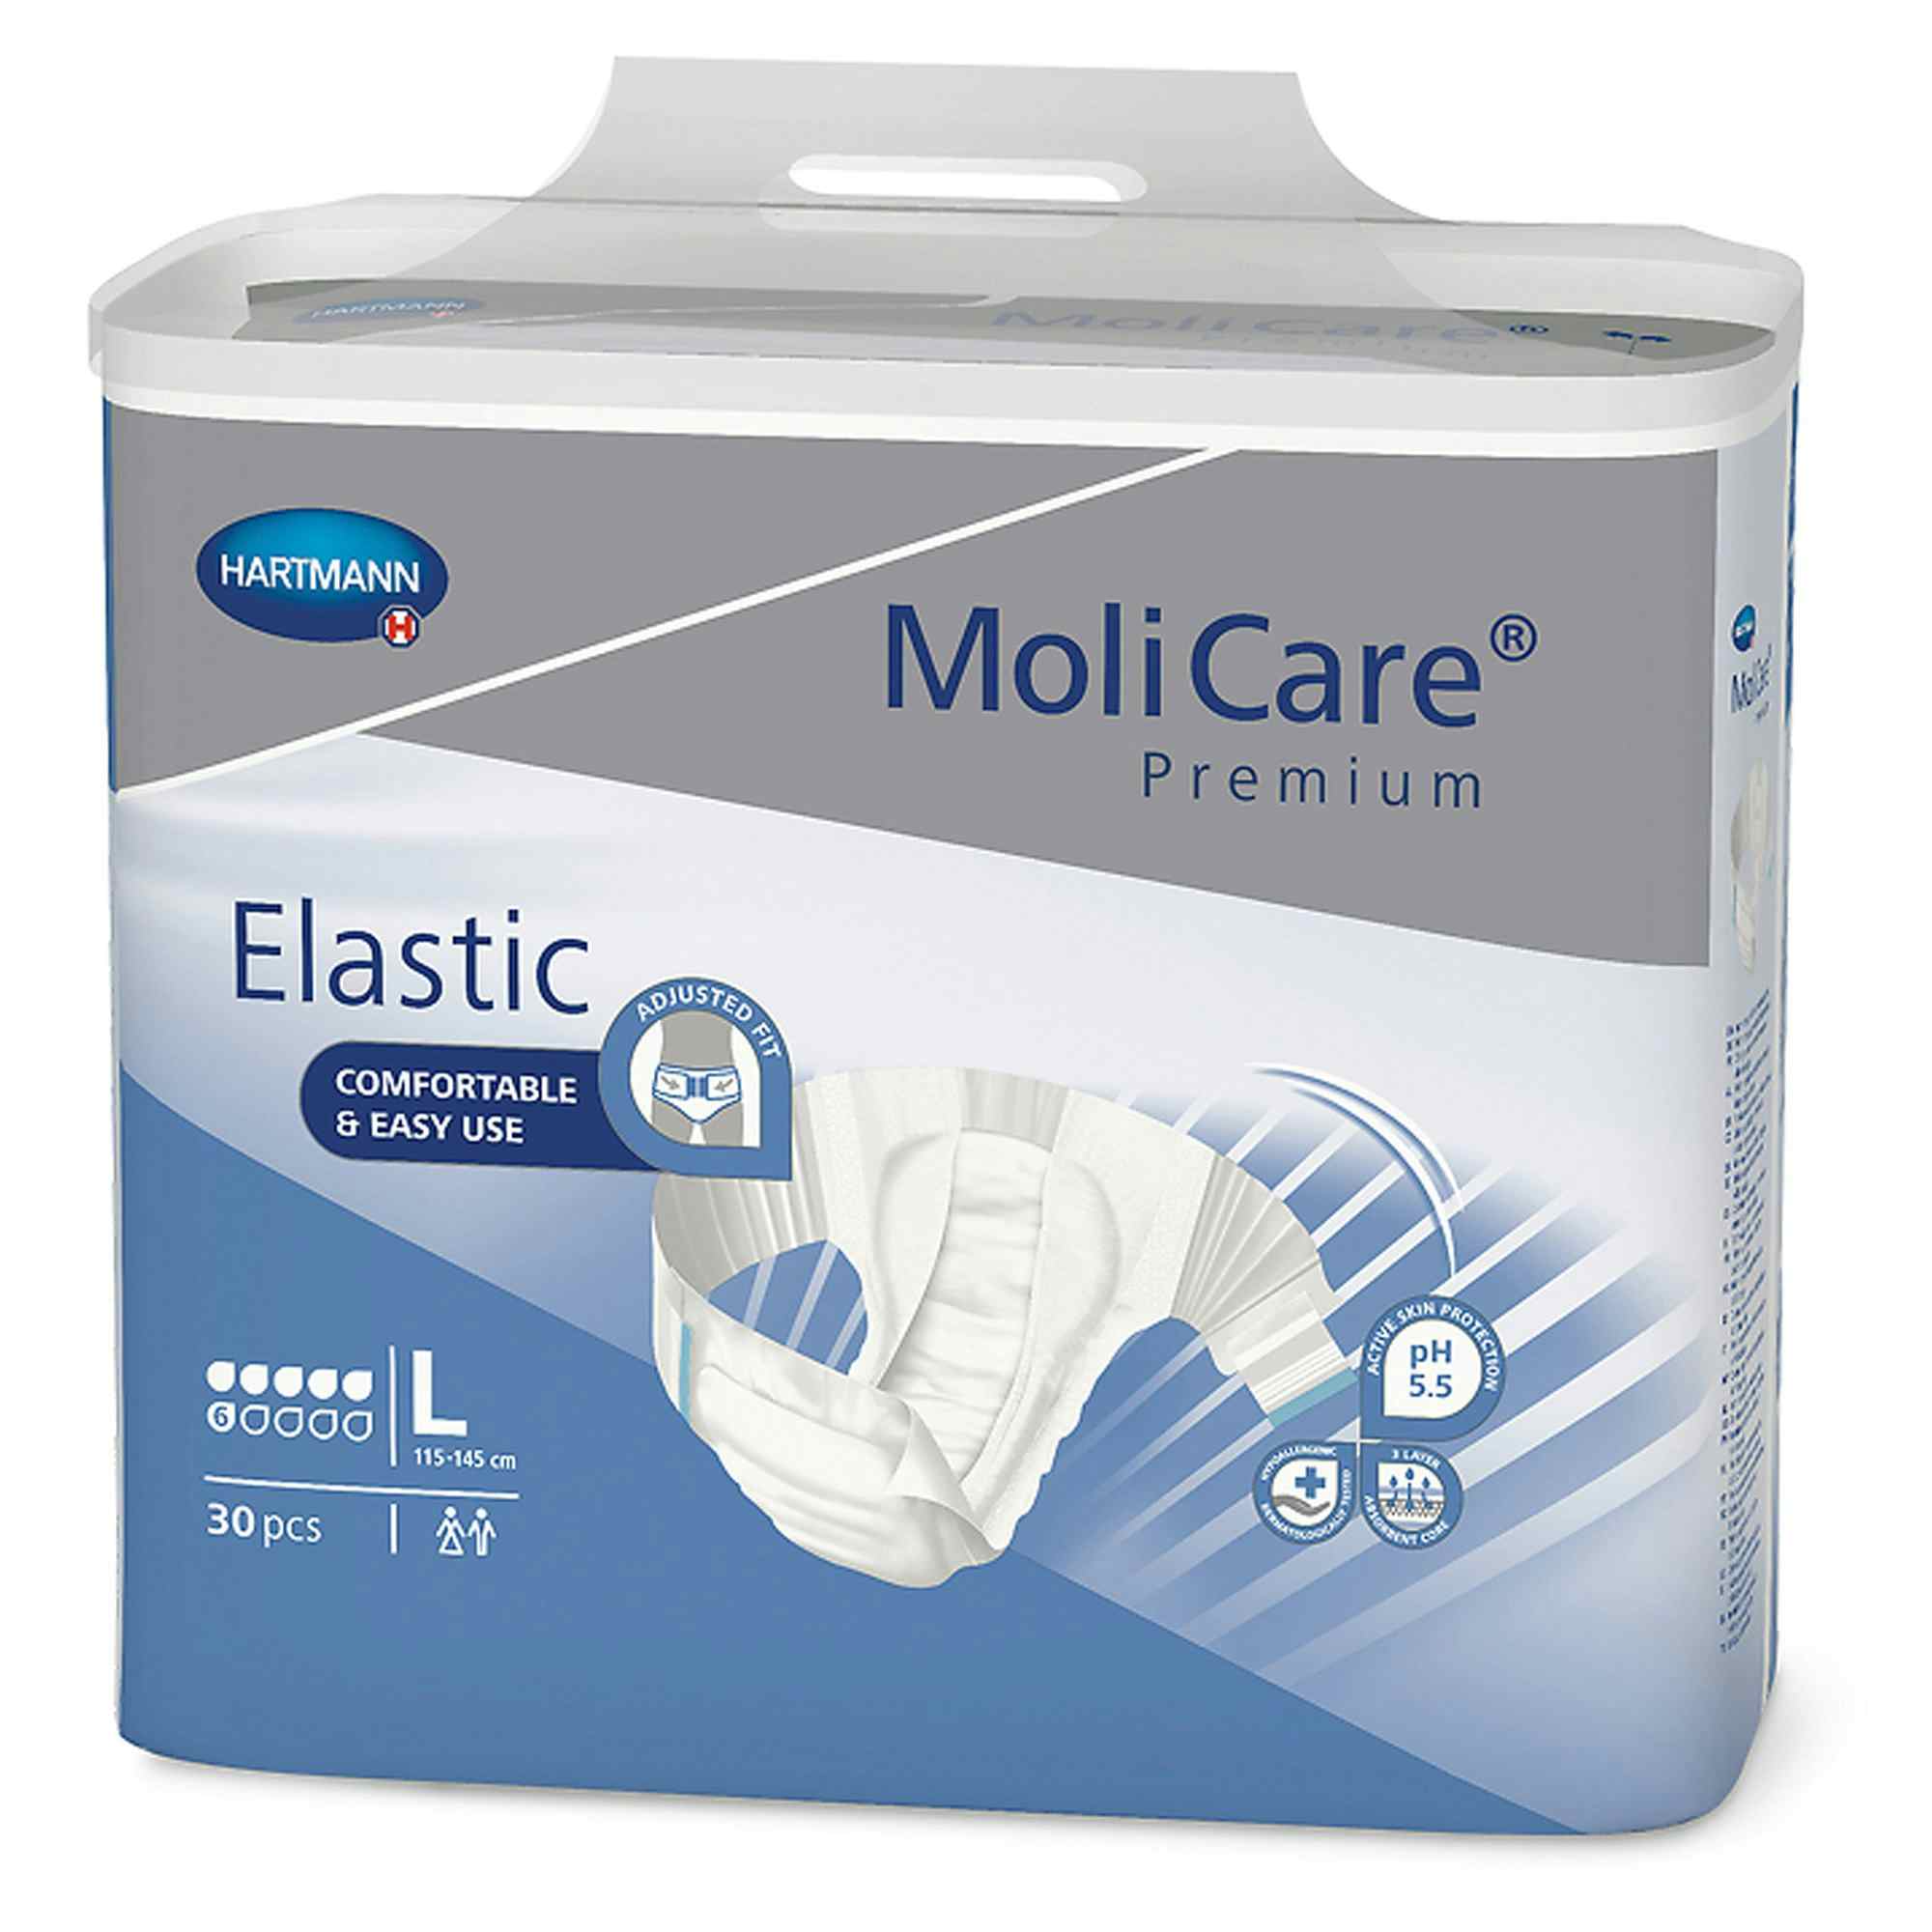 MoliCare Premium Elastic 6D Disposable Brief Adult Diapers with Tabs, Moderate Absorbency, 165273, Large (45-57") - Case of 90